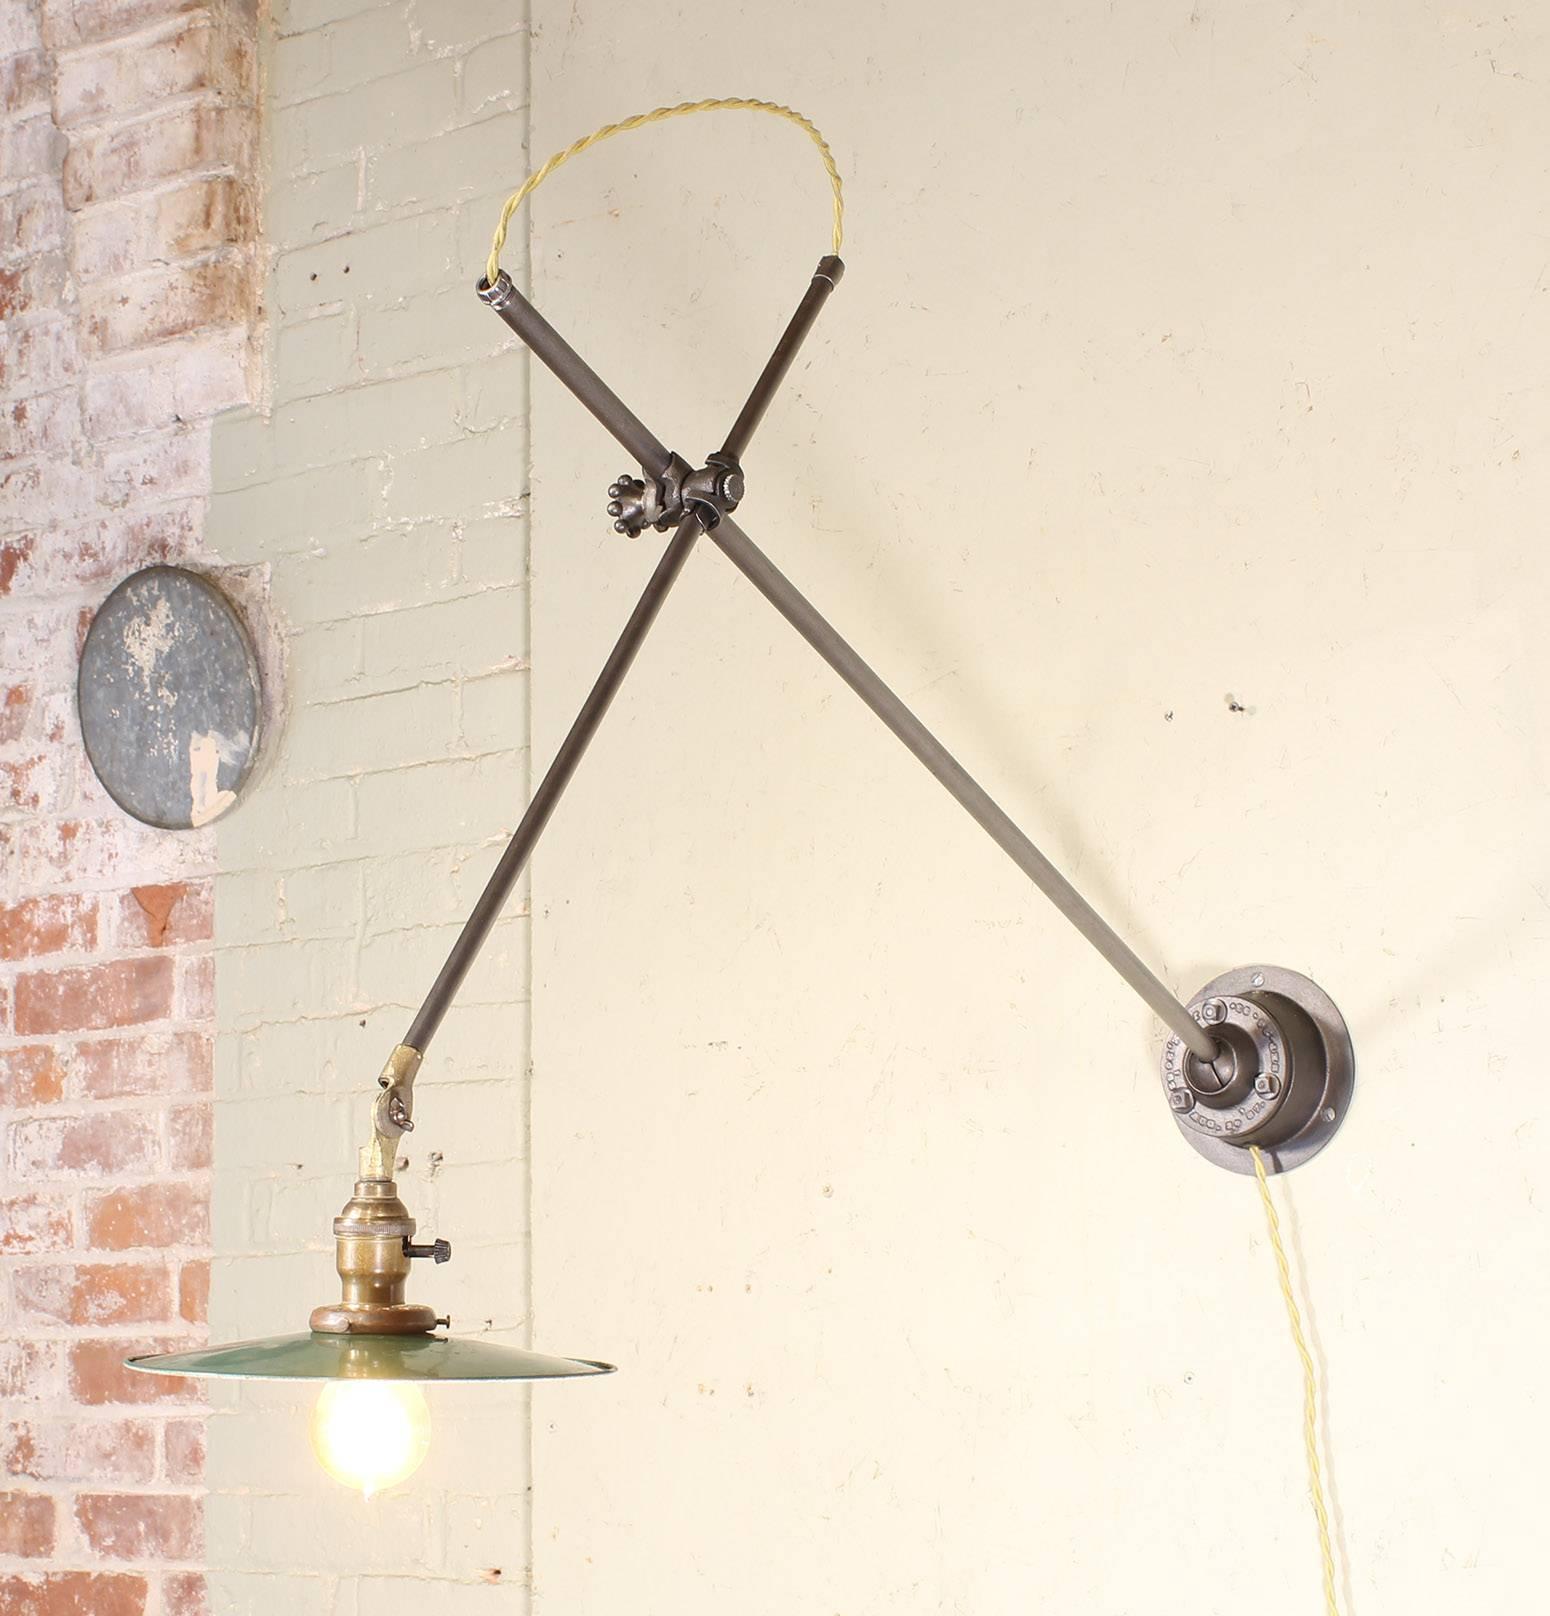 O.C. white adjustable ceiling pendant or wall sconce task lamp, light, cast iron fittings, ball and socket joint at ceiling affording adjustment through 60 degrees in all directions, universal 